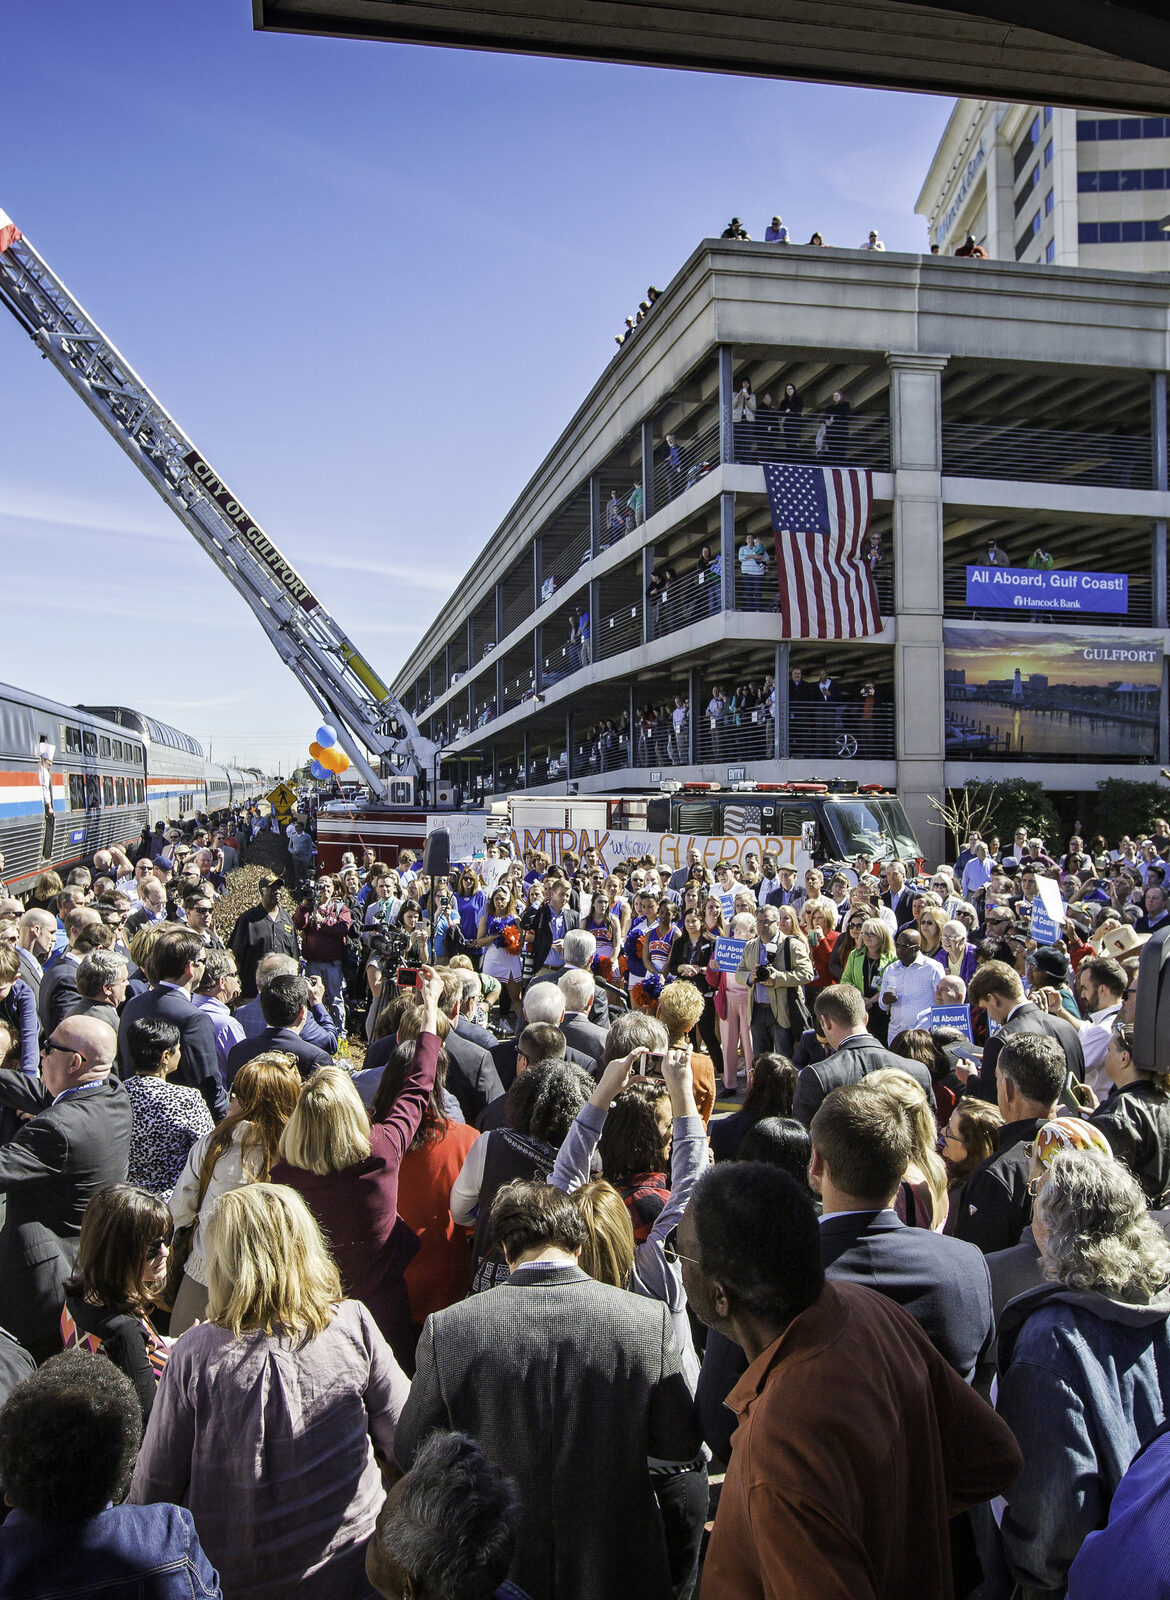 A crowd of people gathers by an Amtrak train, a U.S. flag waving above them.